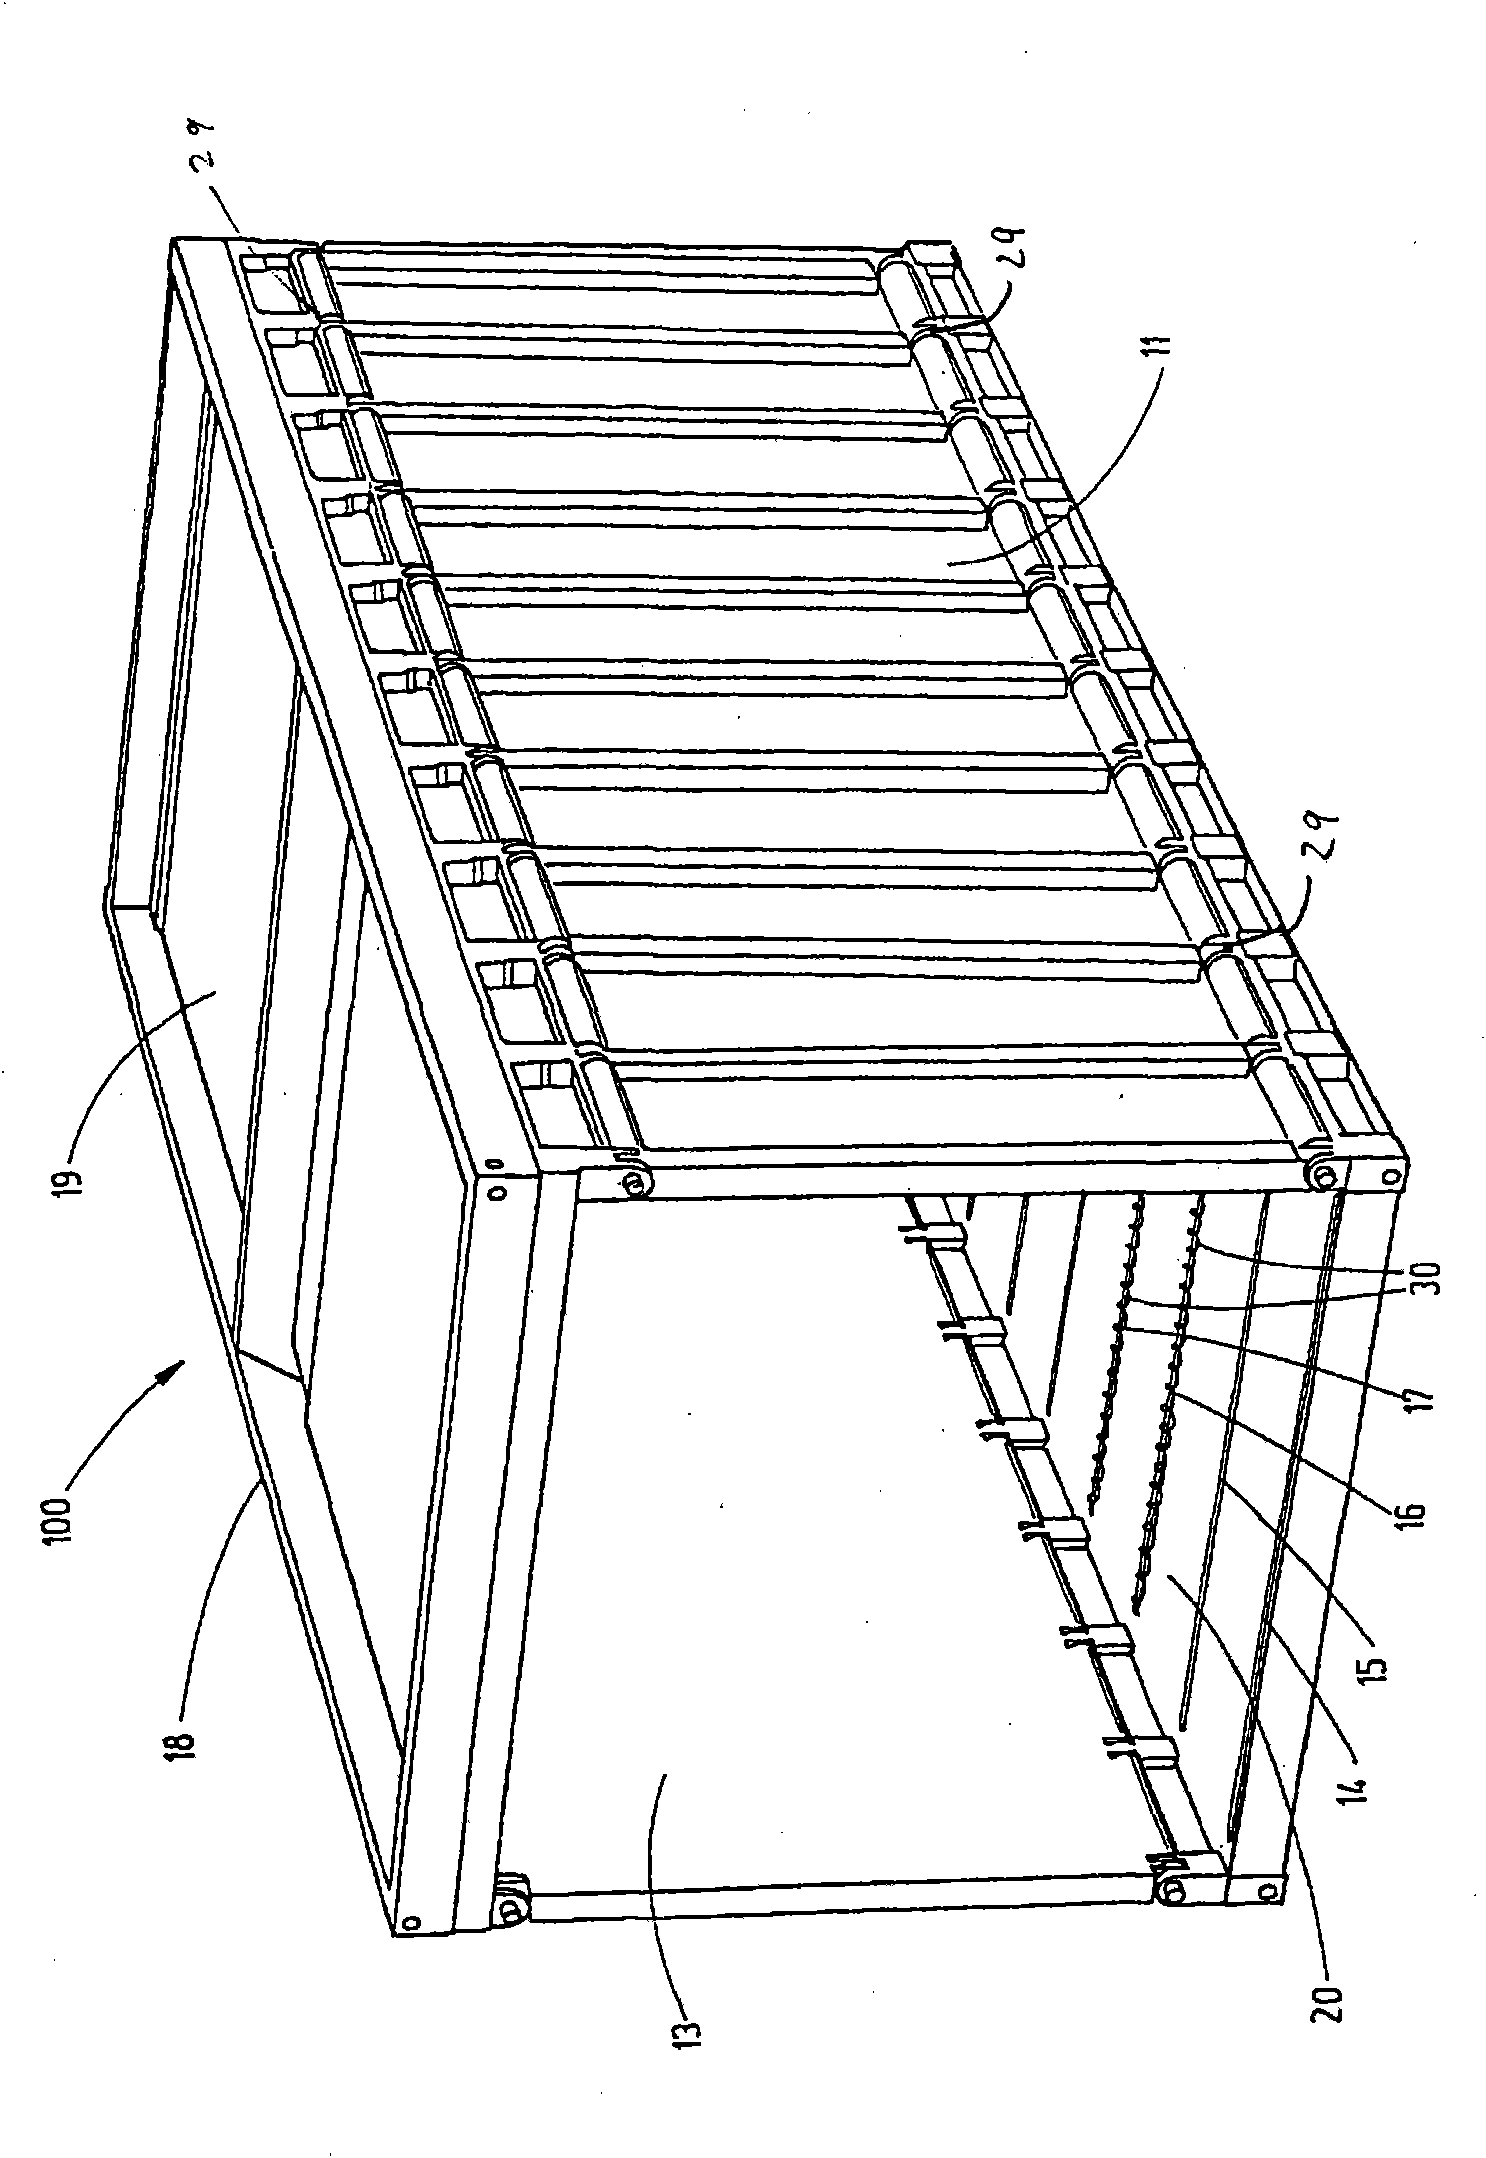 Folding container